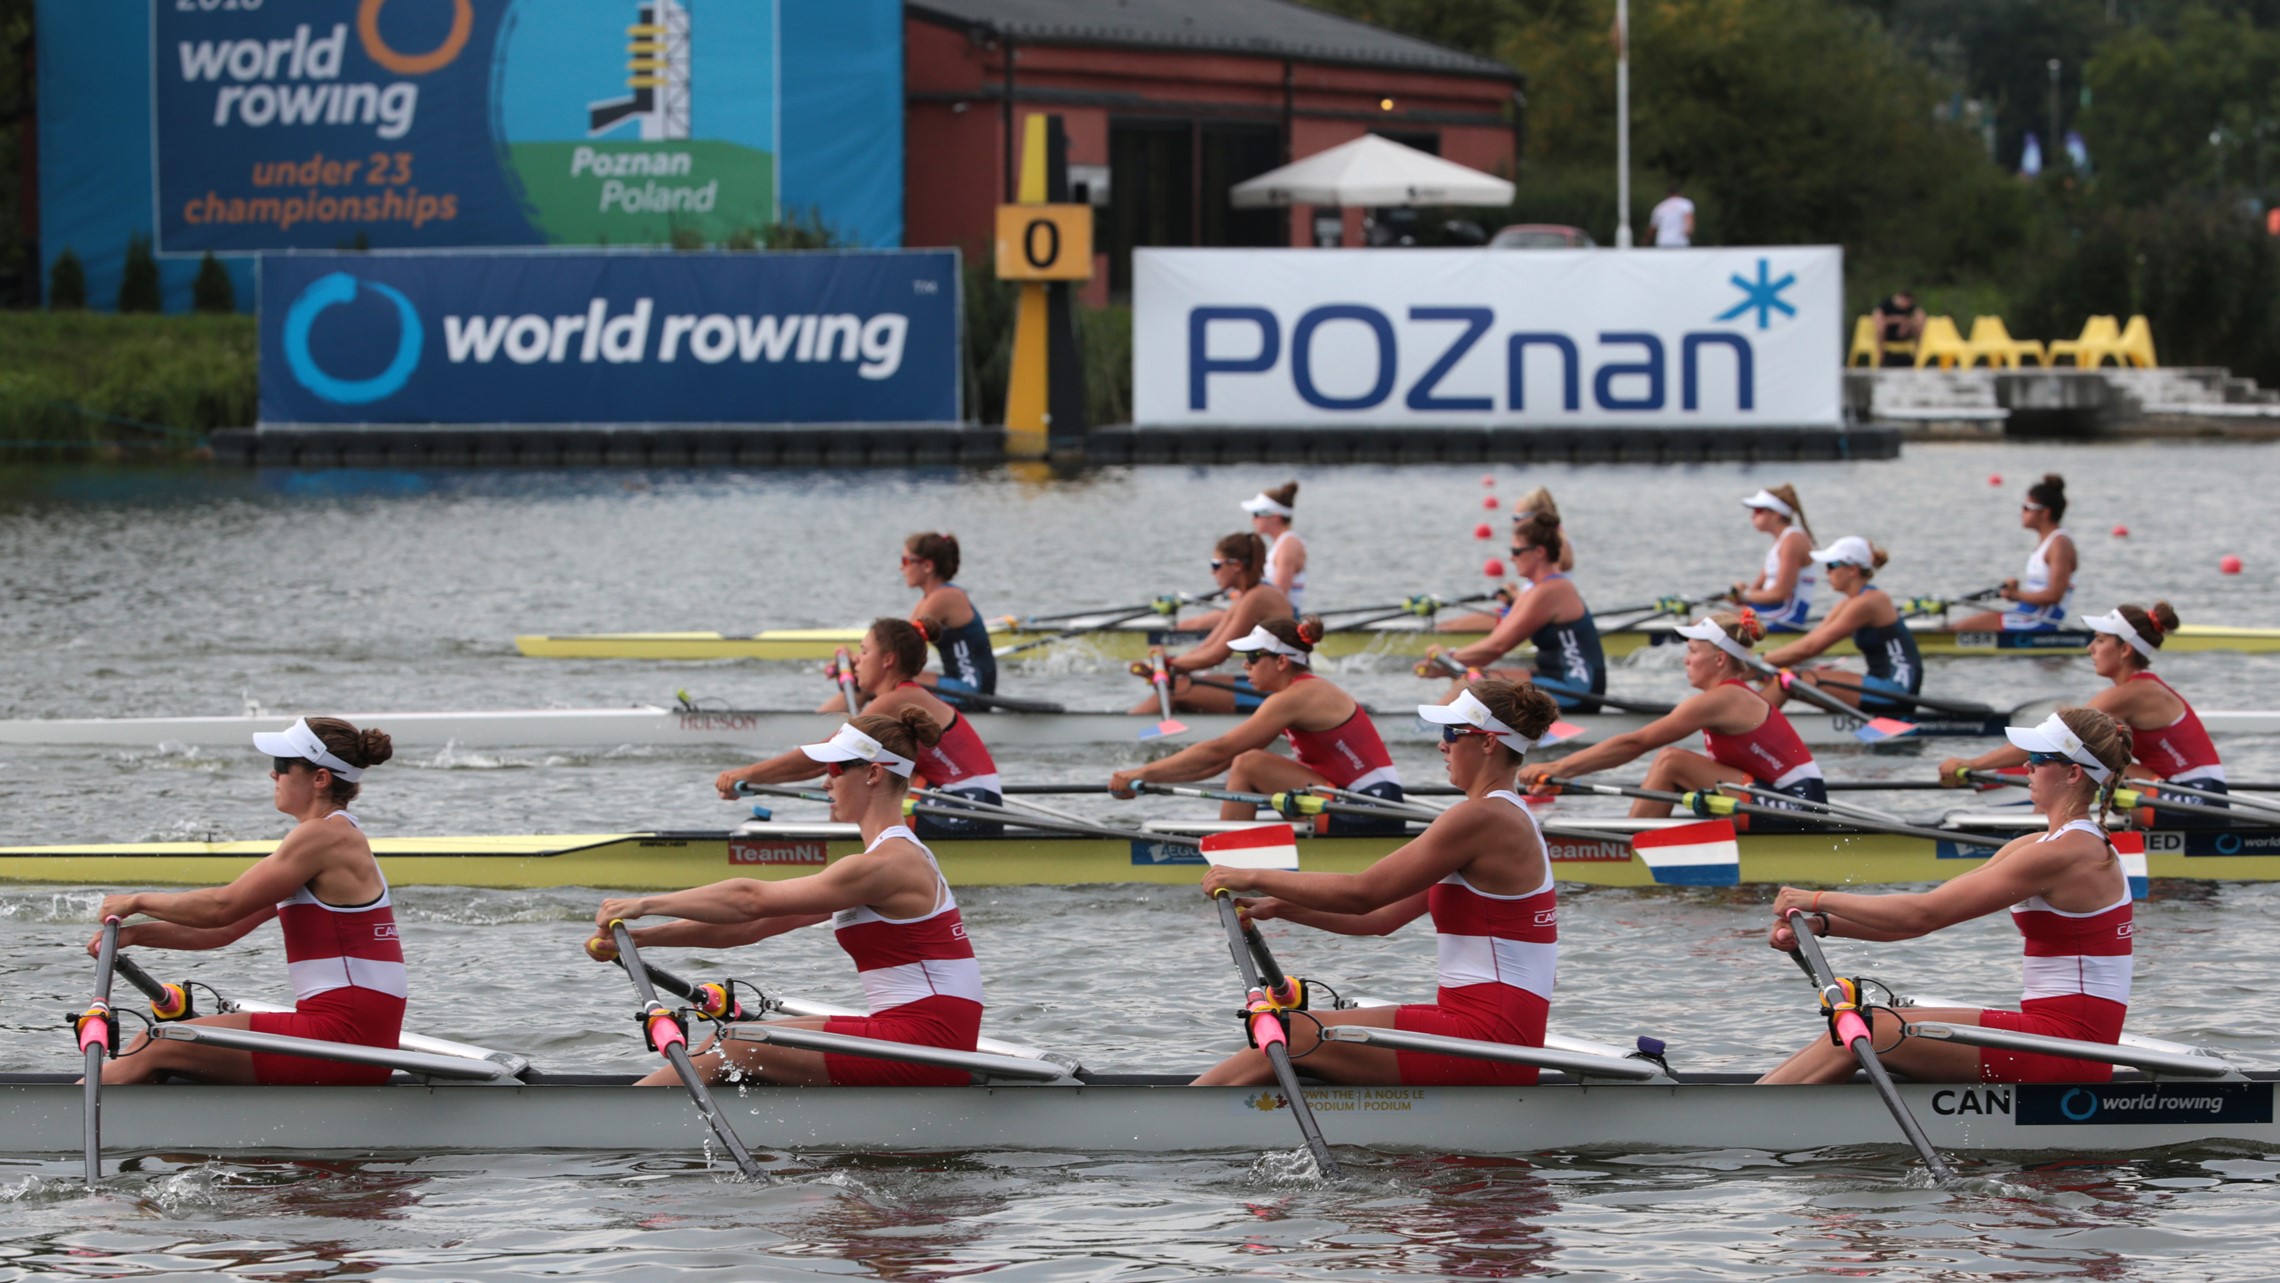 Racing gets underway at the 2018 World Rowing Under 23 Championships